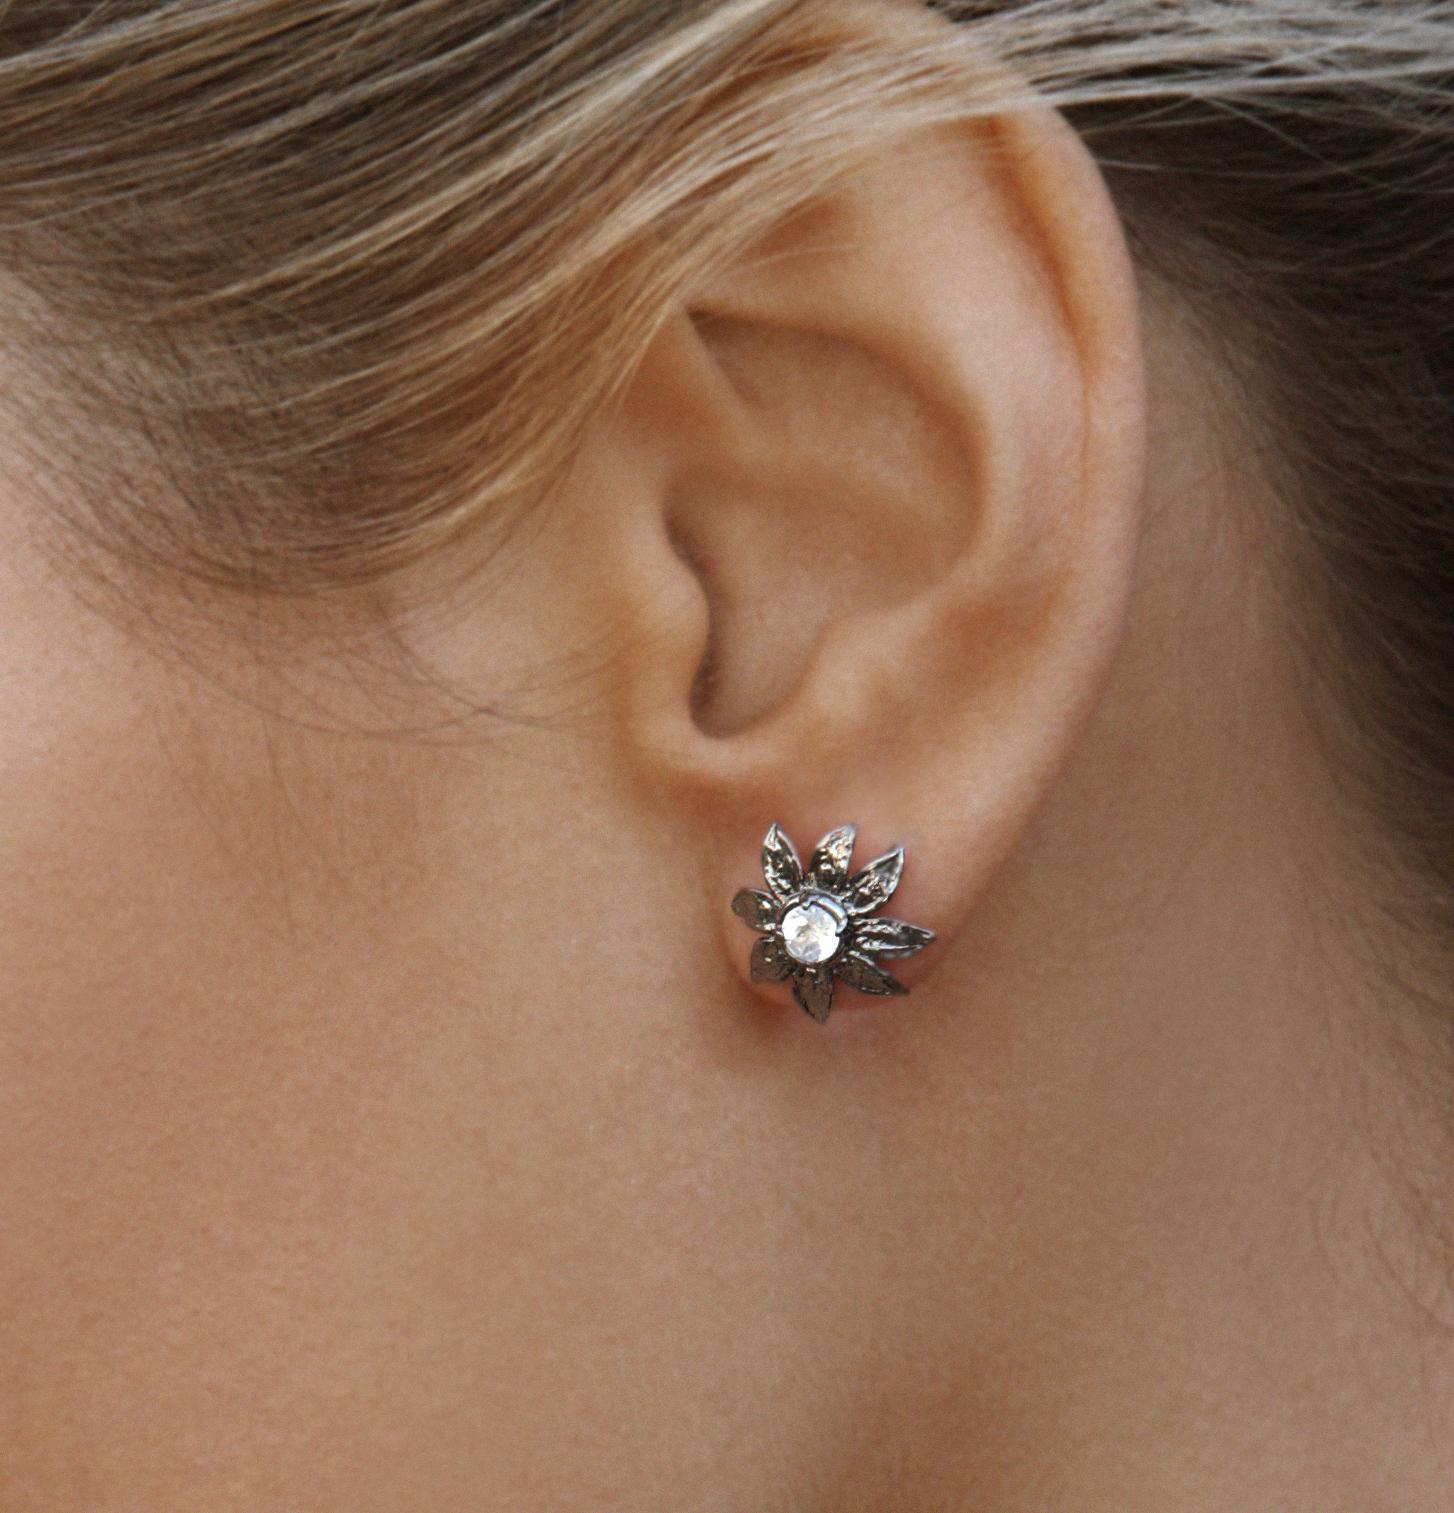 Sterling Silver Flower Stud Earrings with Moonstones with 14 Karat Gold Post In New Condition For Sale In Weehawken, NJ